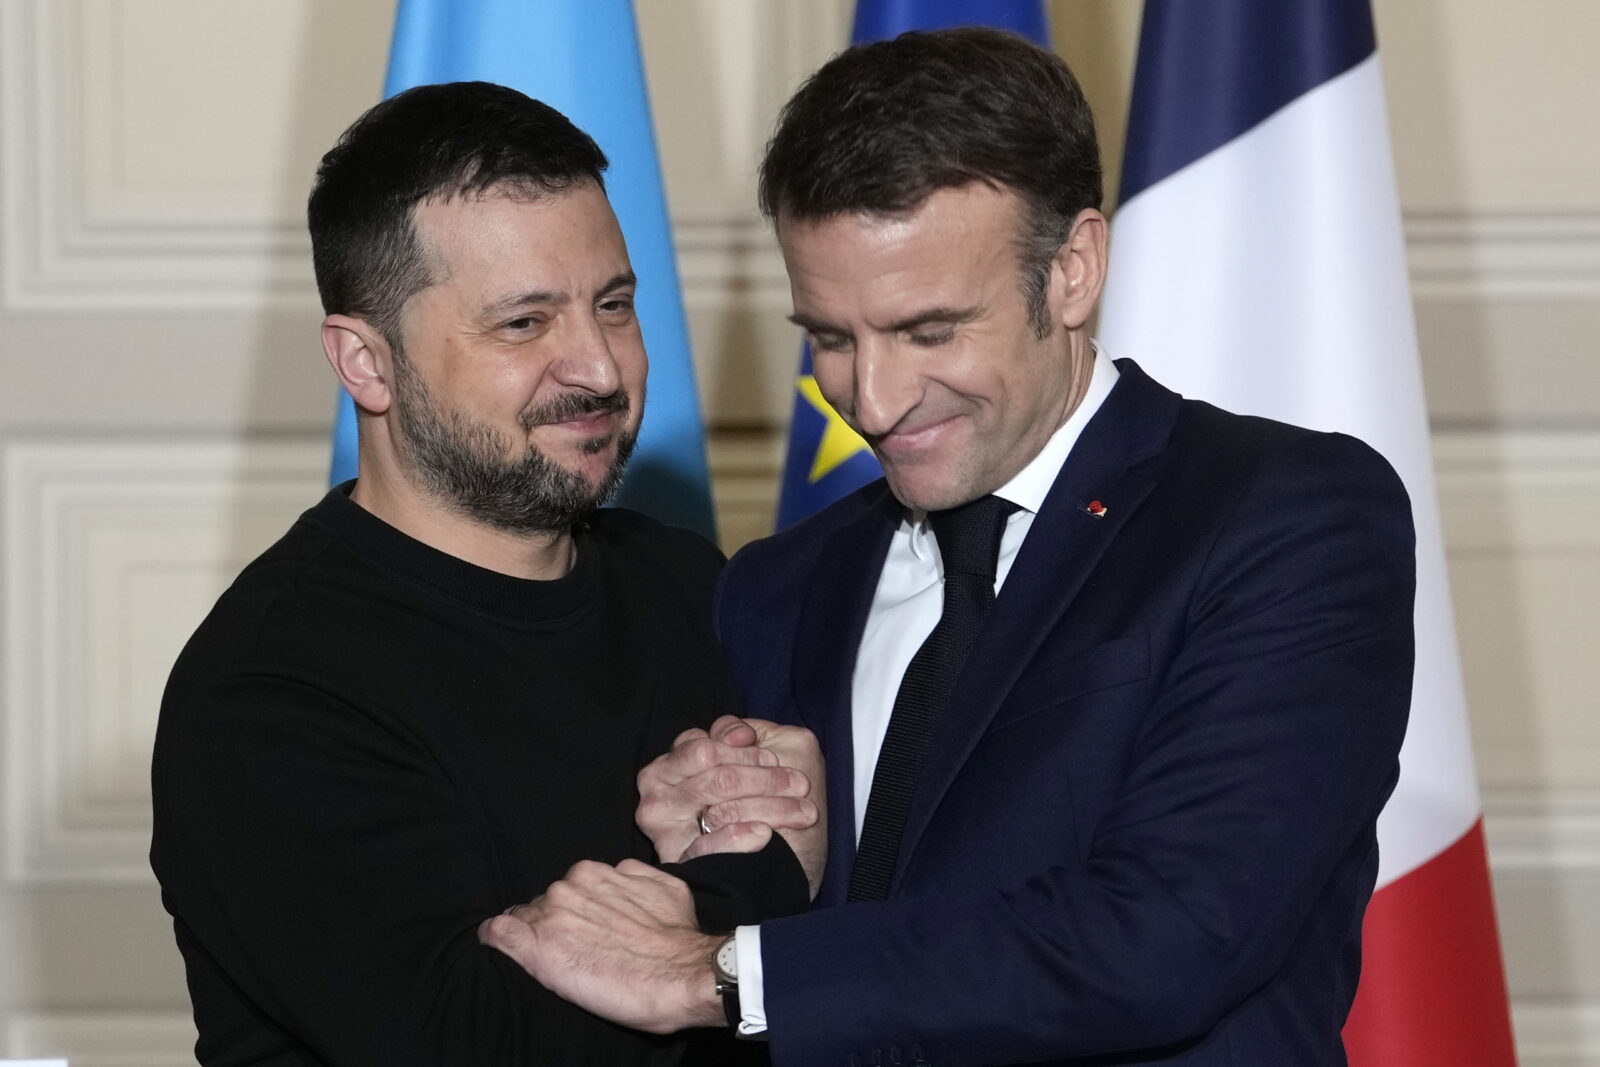 epa11159418 French President Emmanuel Macron (R) and his Ukrainian counterpart Volodymyr Zelensky shake hands after signing an agreement at the Elysee Palace in Paris, France, 16 February 2024. French President Emmanuel Macron will sign a bilateral security agreement with his Ukrainian counterpart, Volodymyr Zelensky to provide 'long-term support' to the war-ravaged country which has been battling Russia's full-scale invasion for nearly two years.  EPA/THIBAULT CAMUS / POOL MAXPPP OUT